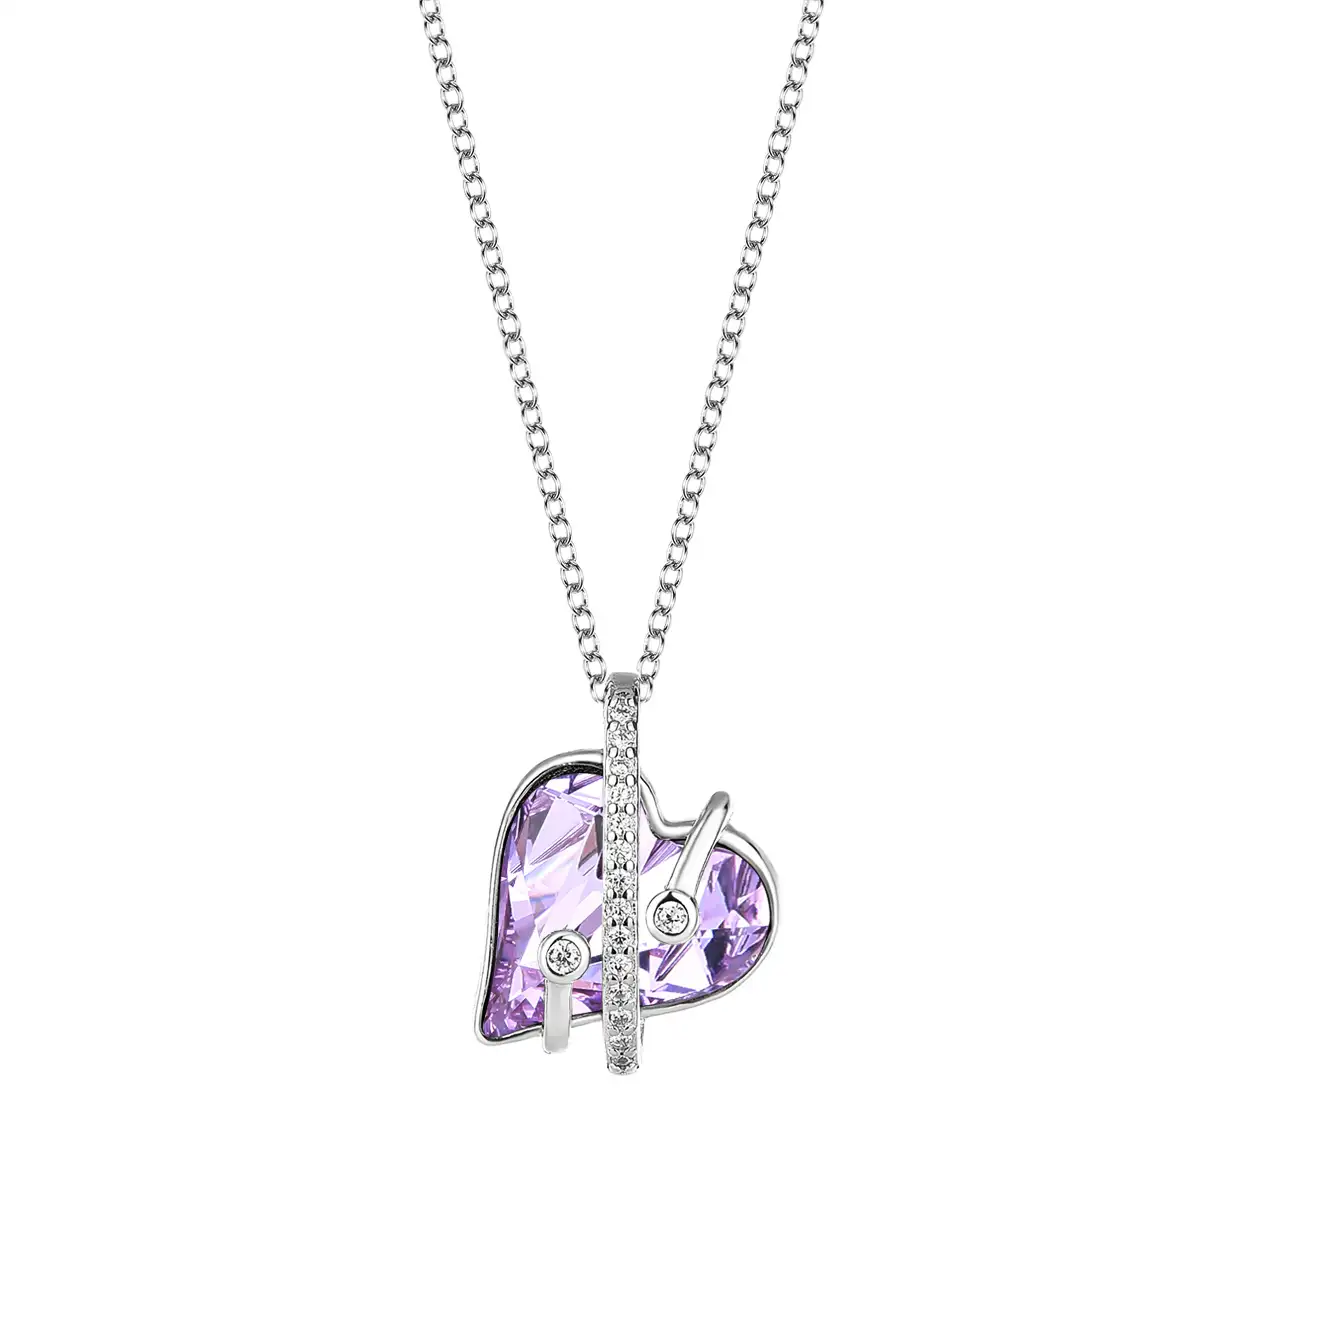 Crystals from Swarovski Love Heart Cubic Zirconia Pendant Necklace 80200085